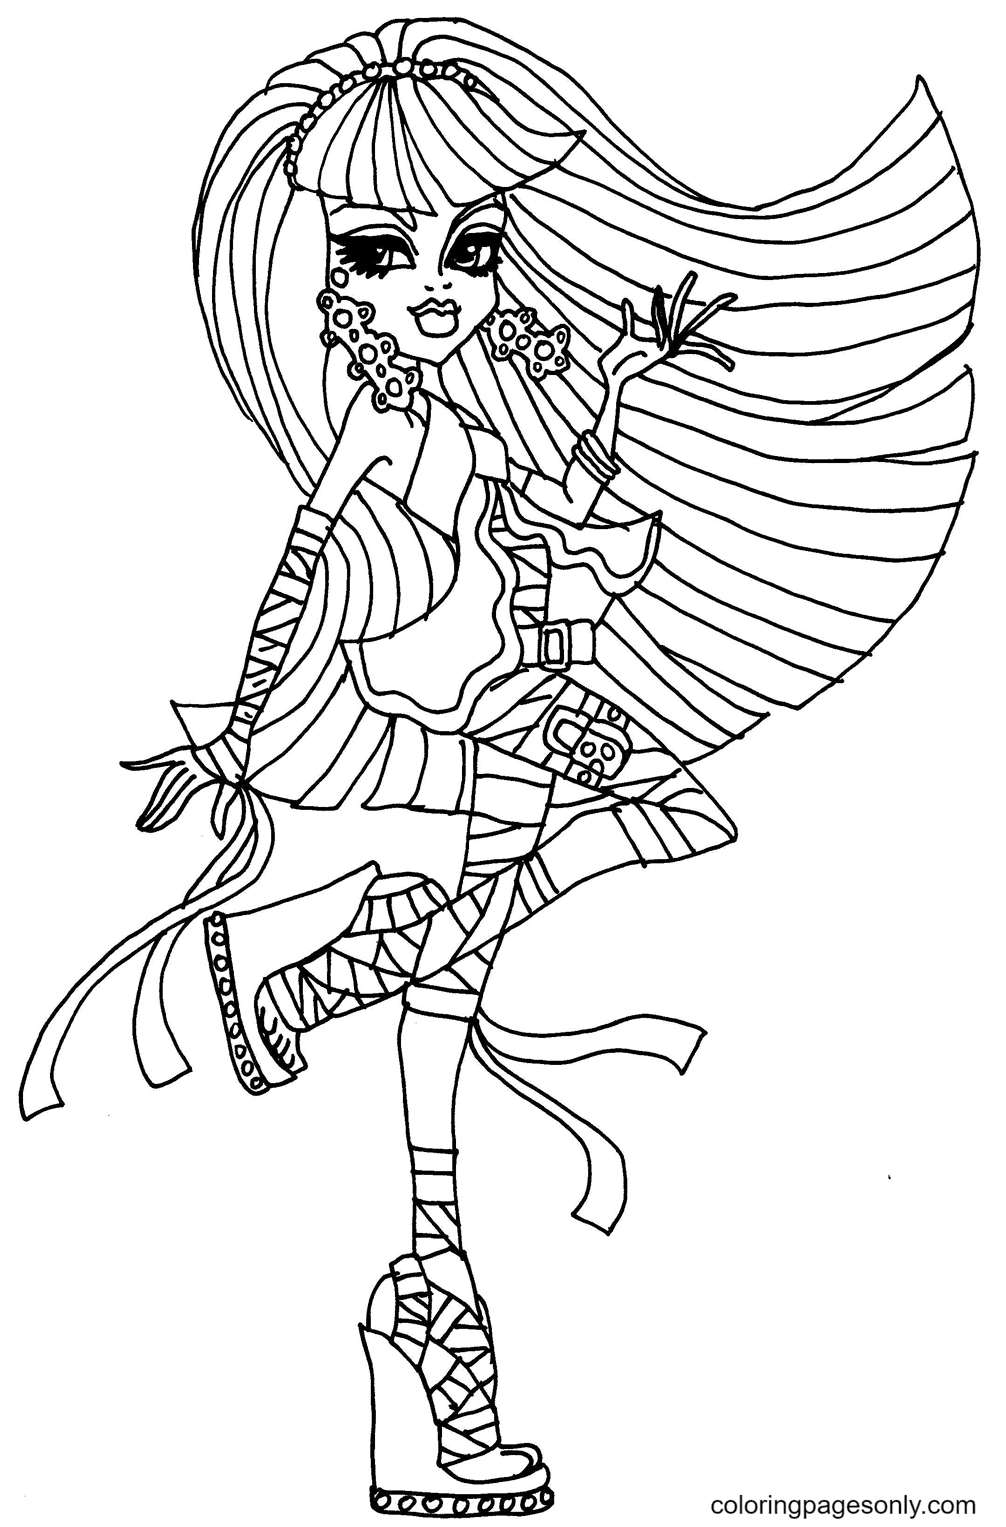 Monster High Cleo de Nile Coloring Page